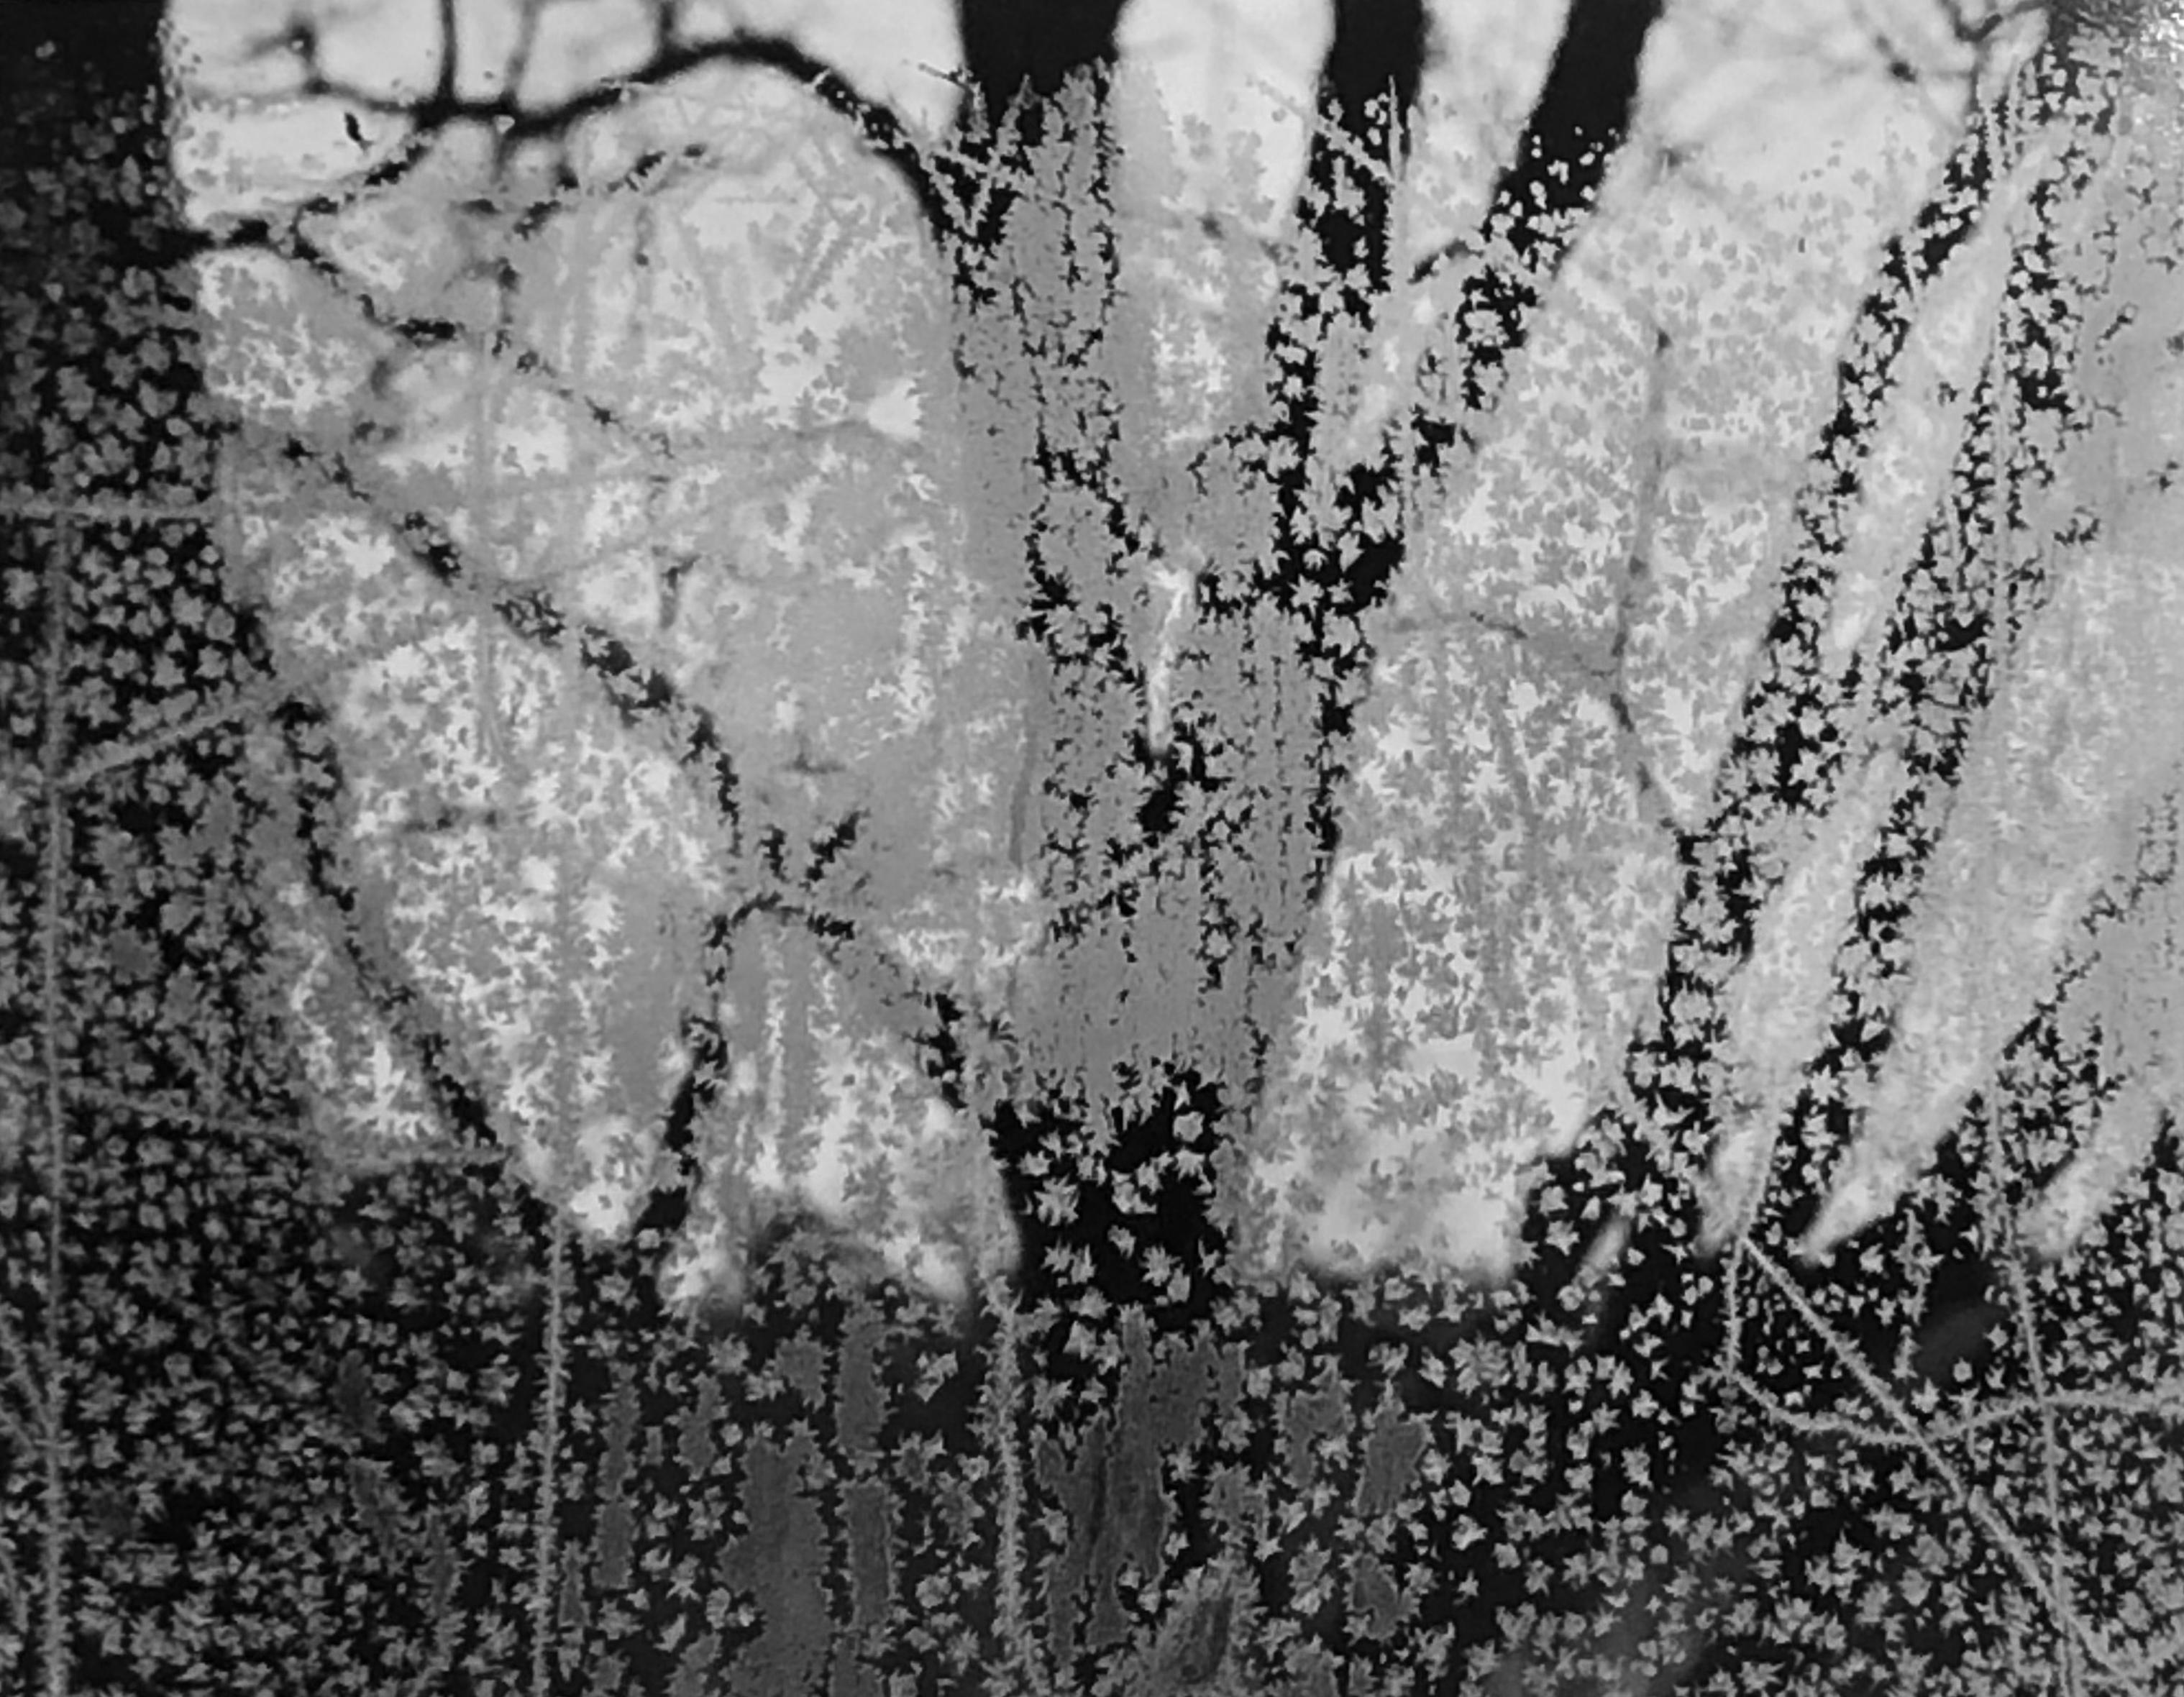 Paul Caponigro Landscape Photograph - Frosted Window, Ipswich, MA